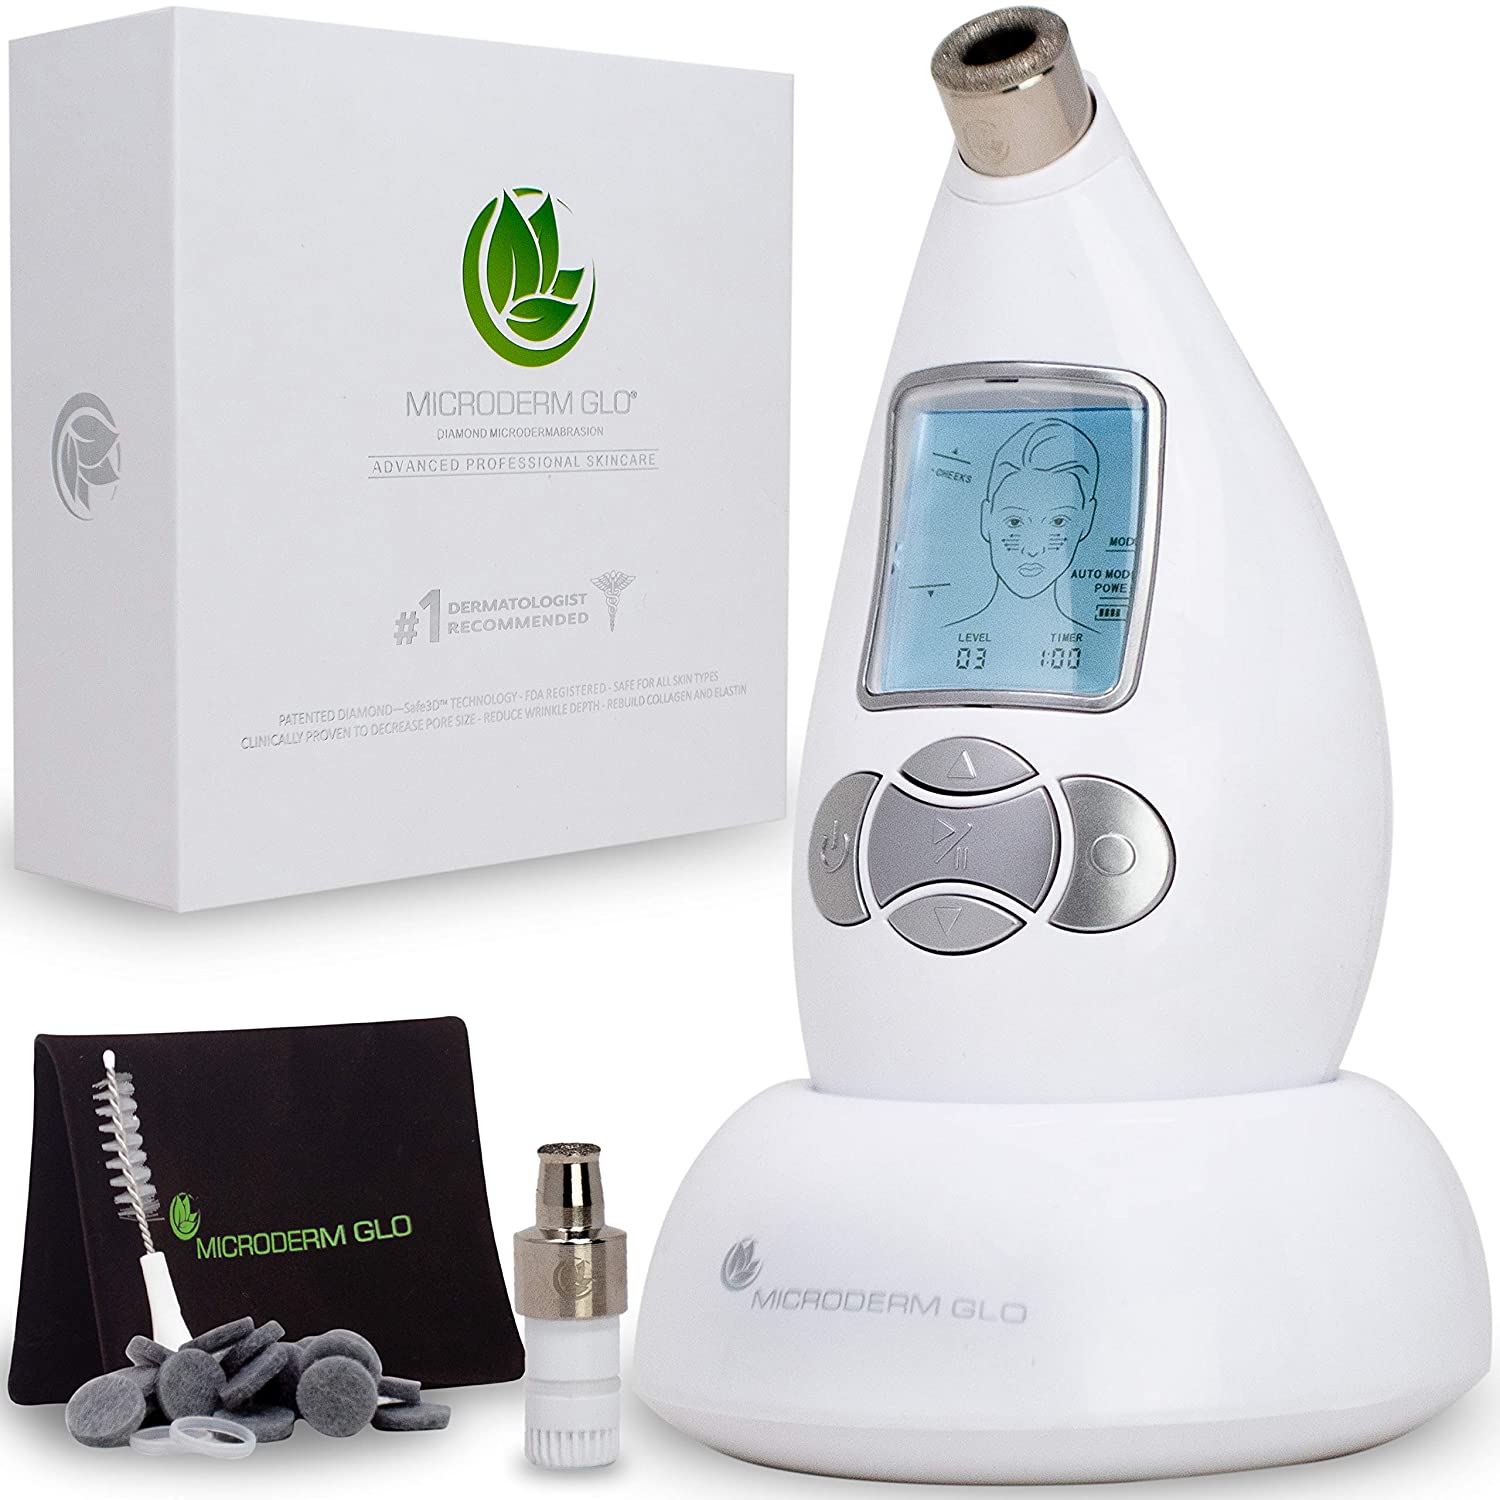 Microderm GLO Diamond Microdermabrasion Machine and Suction Tool, Clinical Micro Dermabrasion Kit, White - image 1 of 6